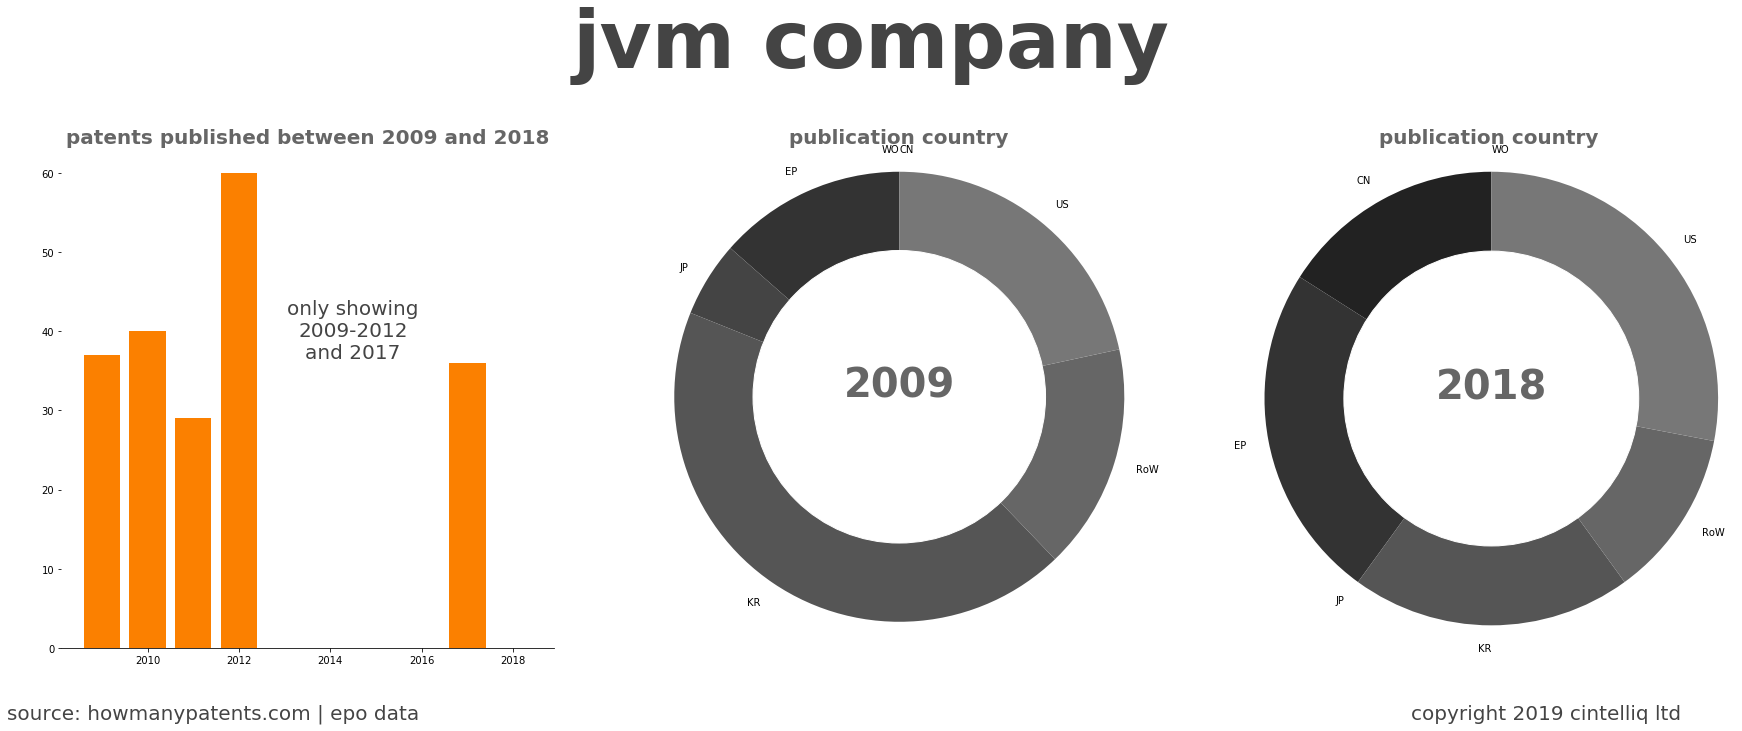 summary of patents for Jvm Company